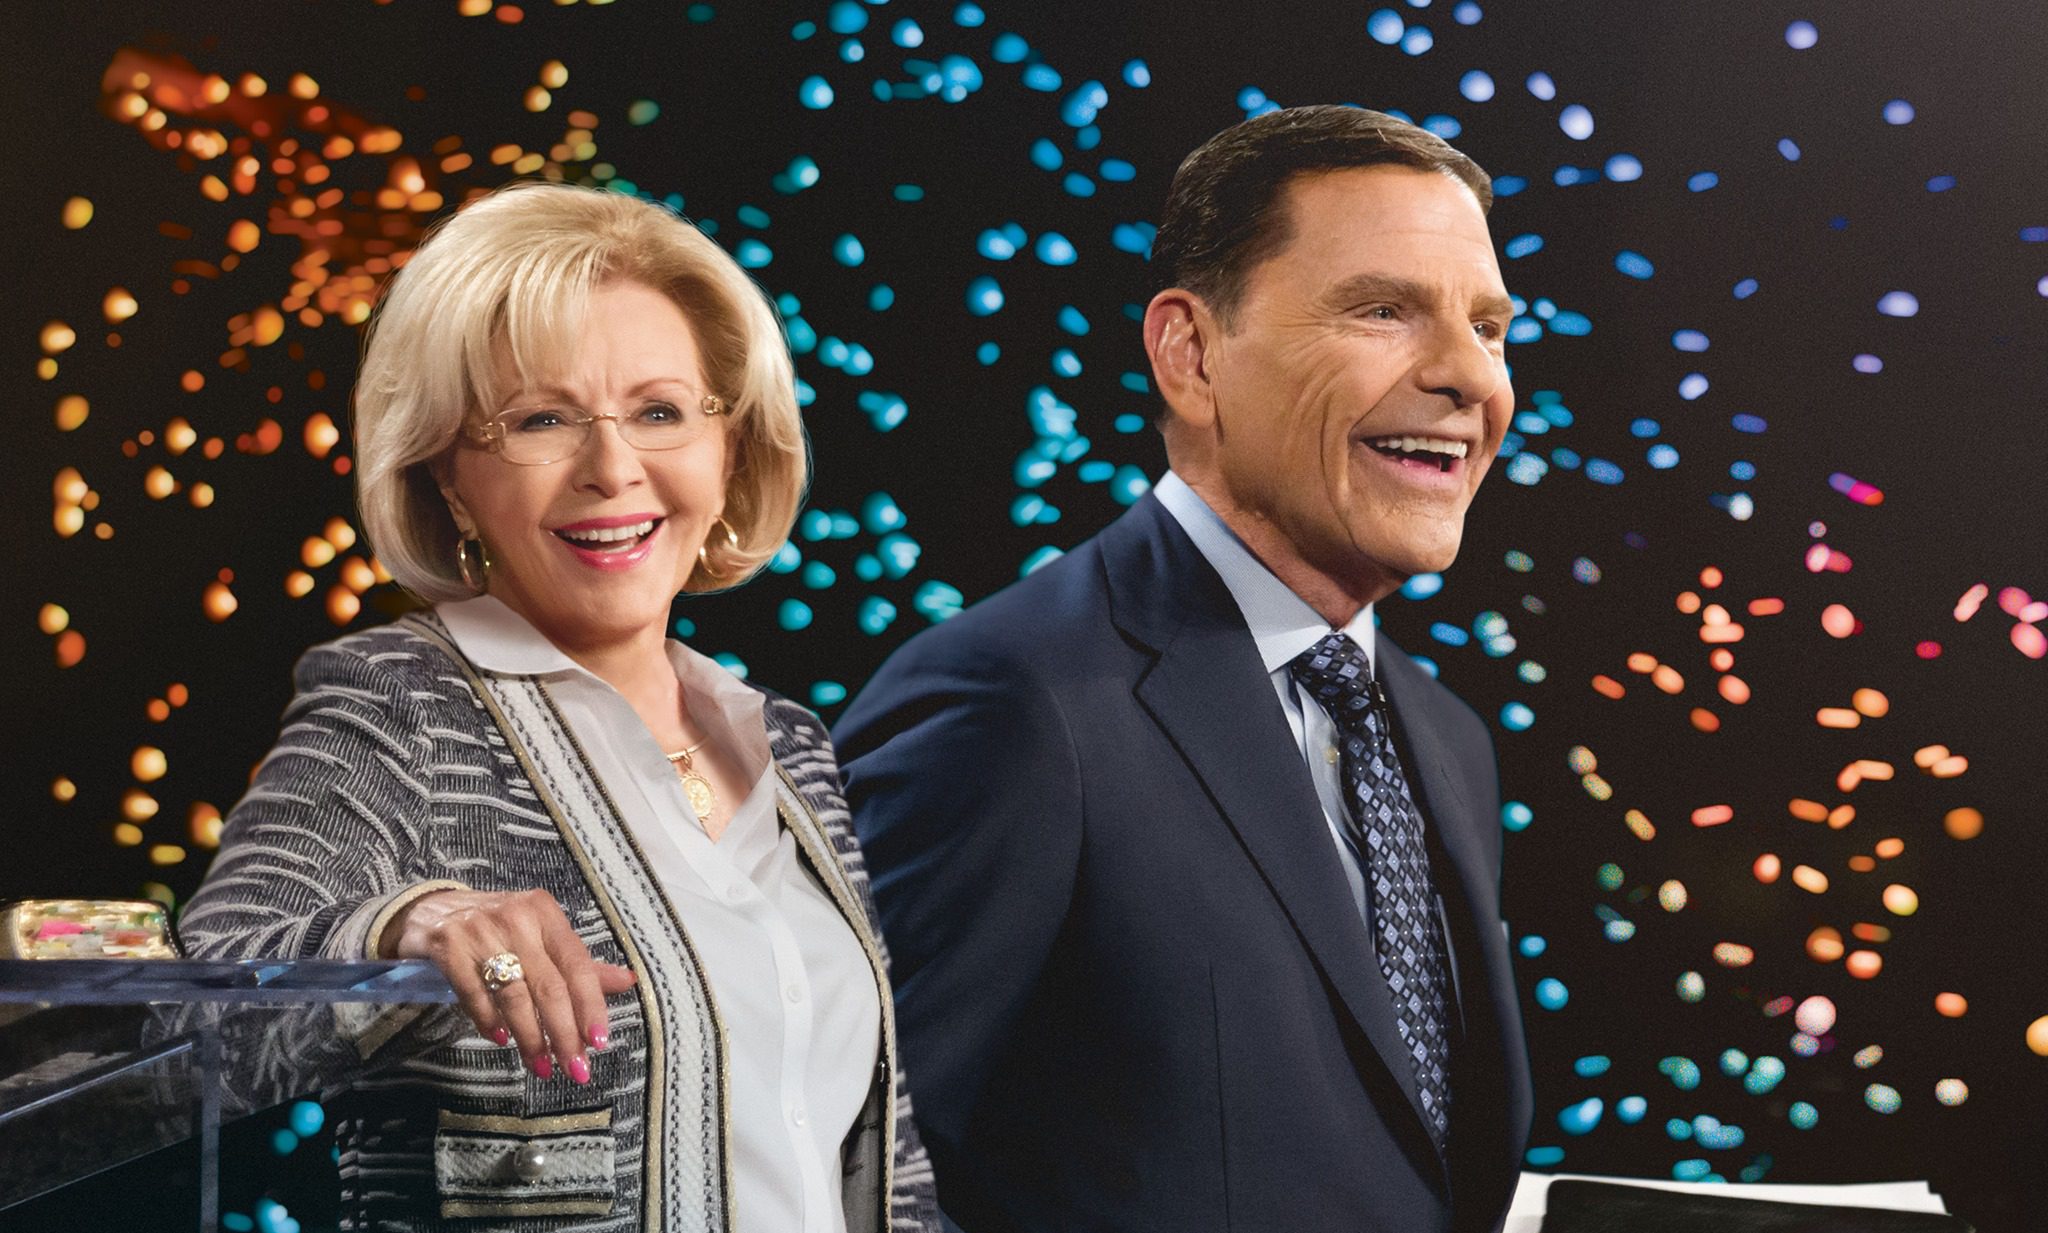 Kenneth Copeland's Testimony on how he became a covenant partner with Oral Roberts Ministries